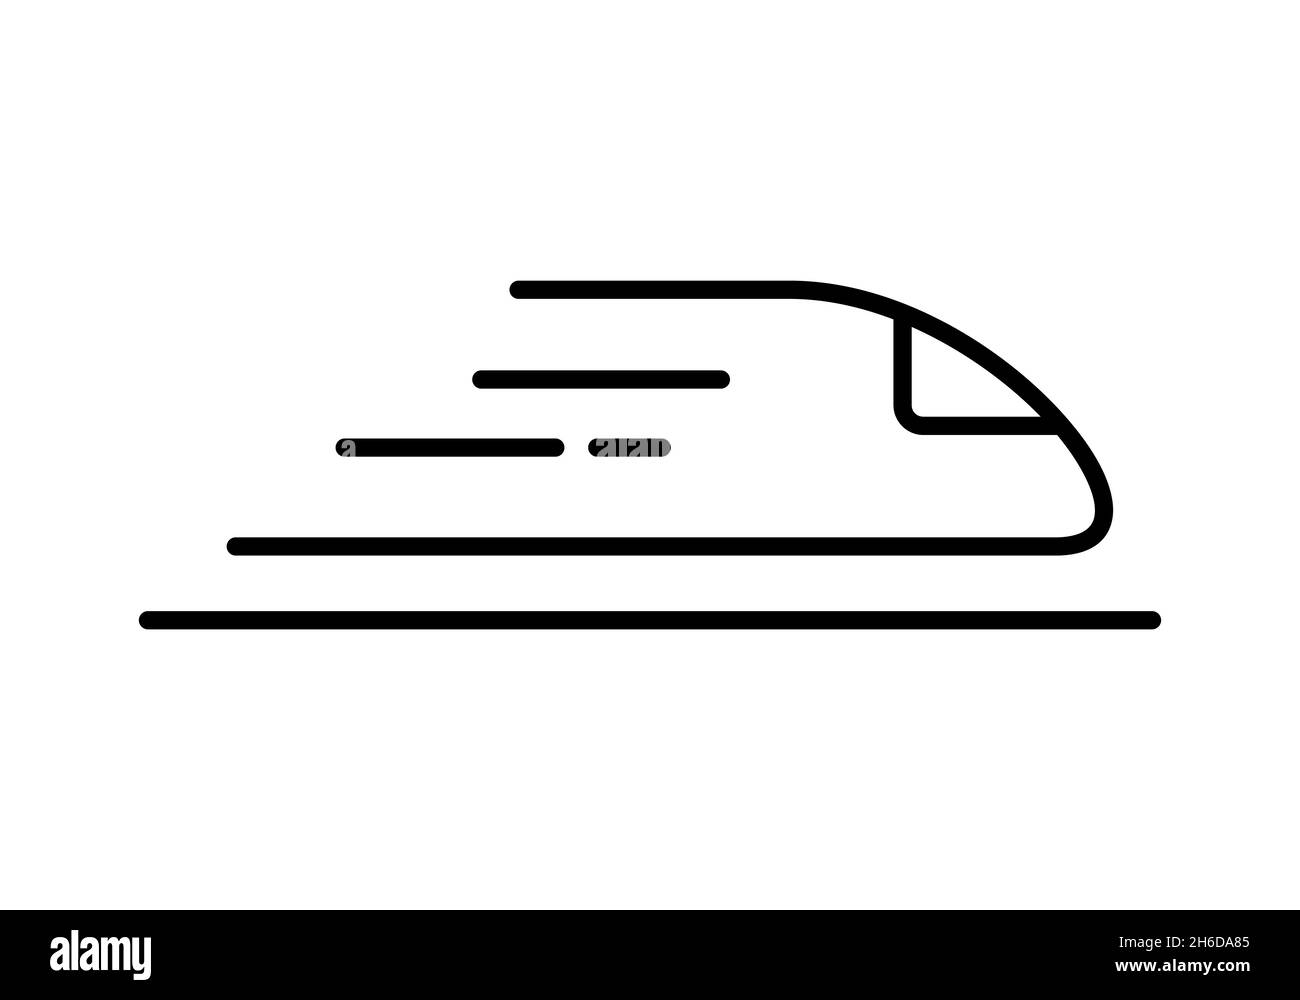 Maglev train floating Black and White Stock Photos & Images - Alamy